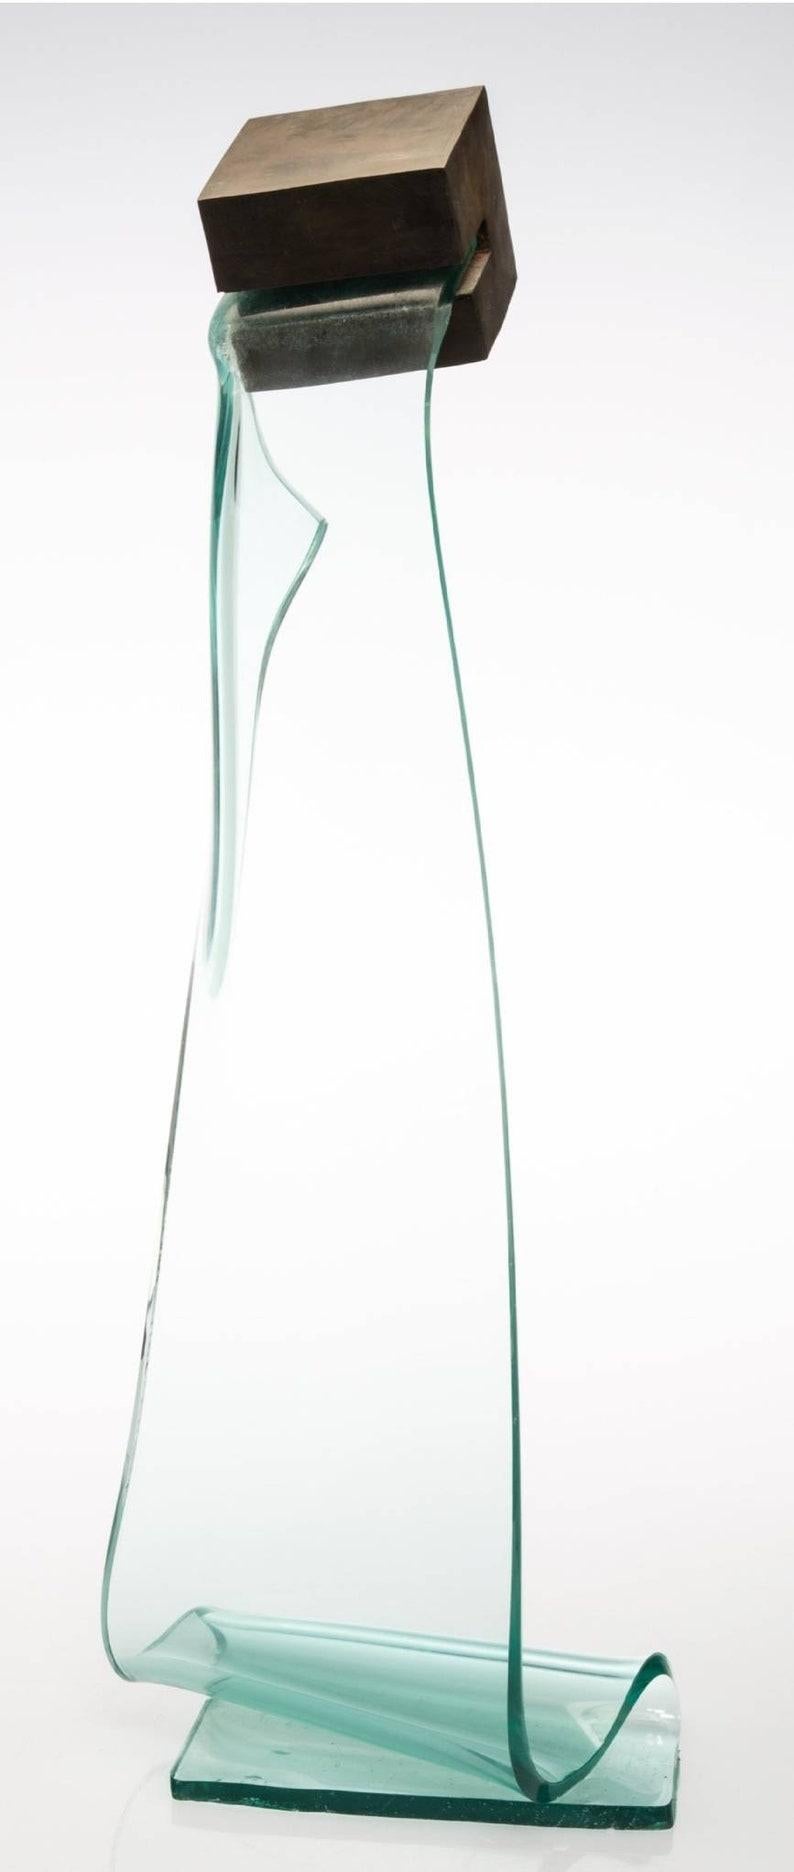 A rare and spectacular freestanding American Post-Modernist industrial slumped glass and bronze sculpture by Mary Shaffer (United States, b.1947) Cube #9. circa 1991.  

Materials: Glass, bronze
Tall / Large floor standing

Dimensions:
33